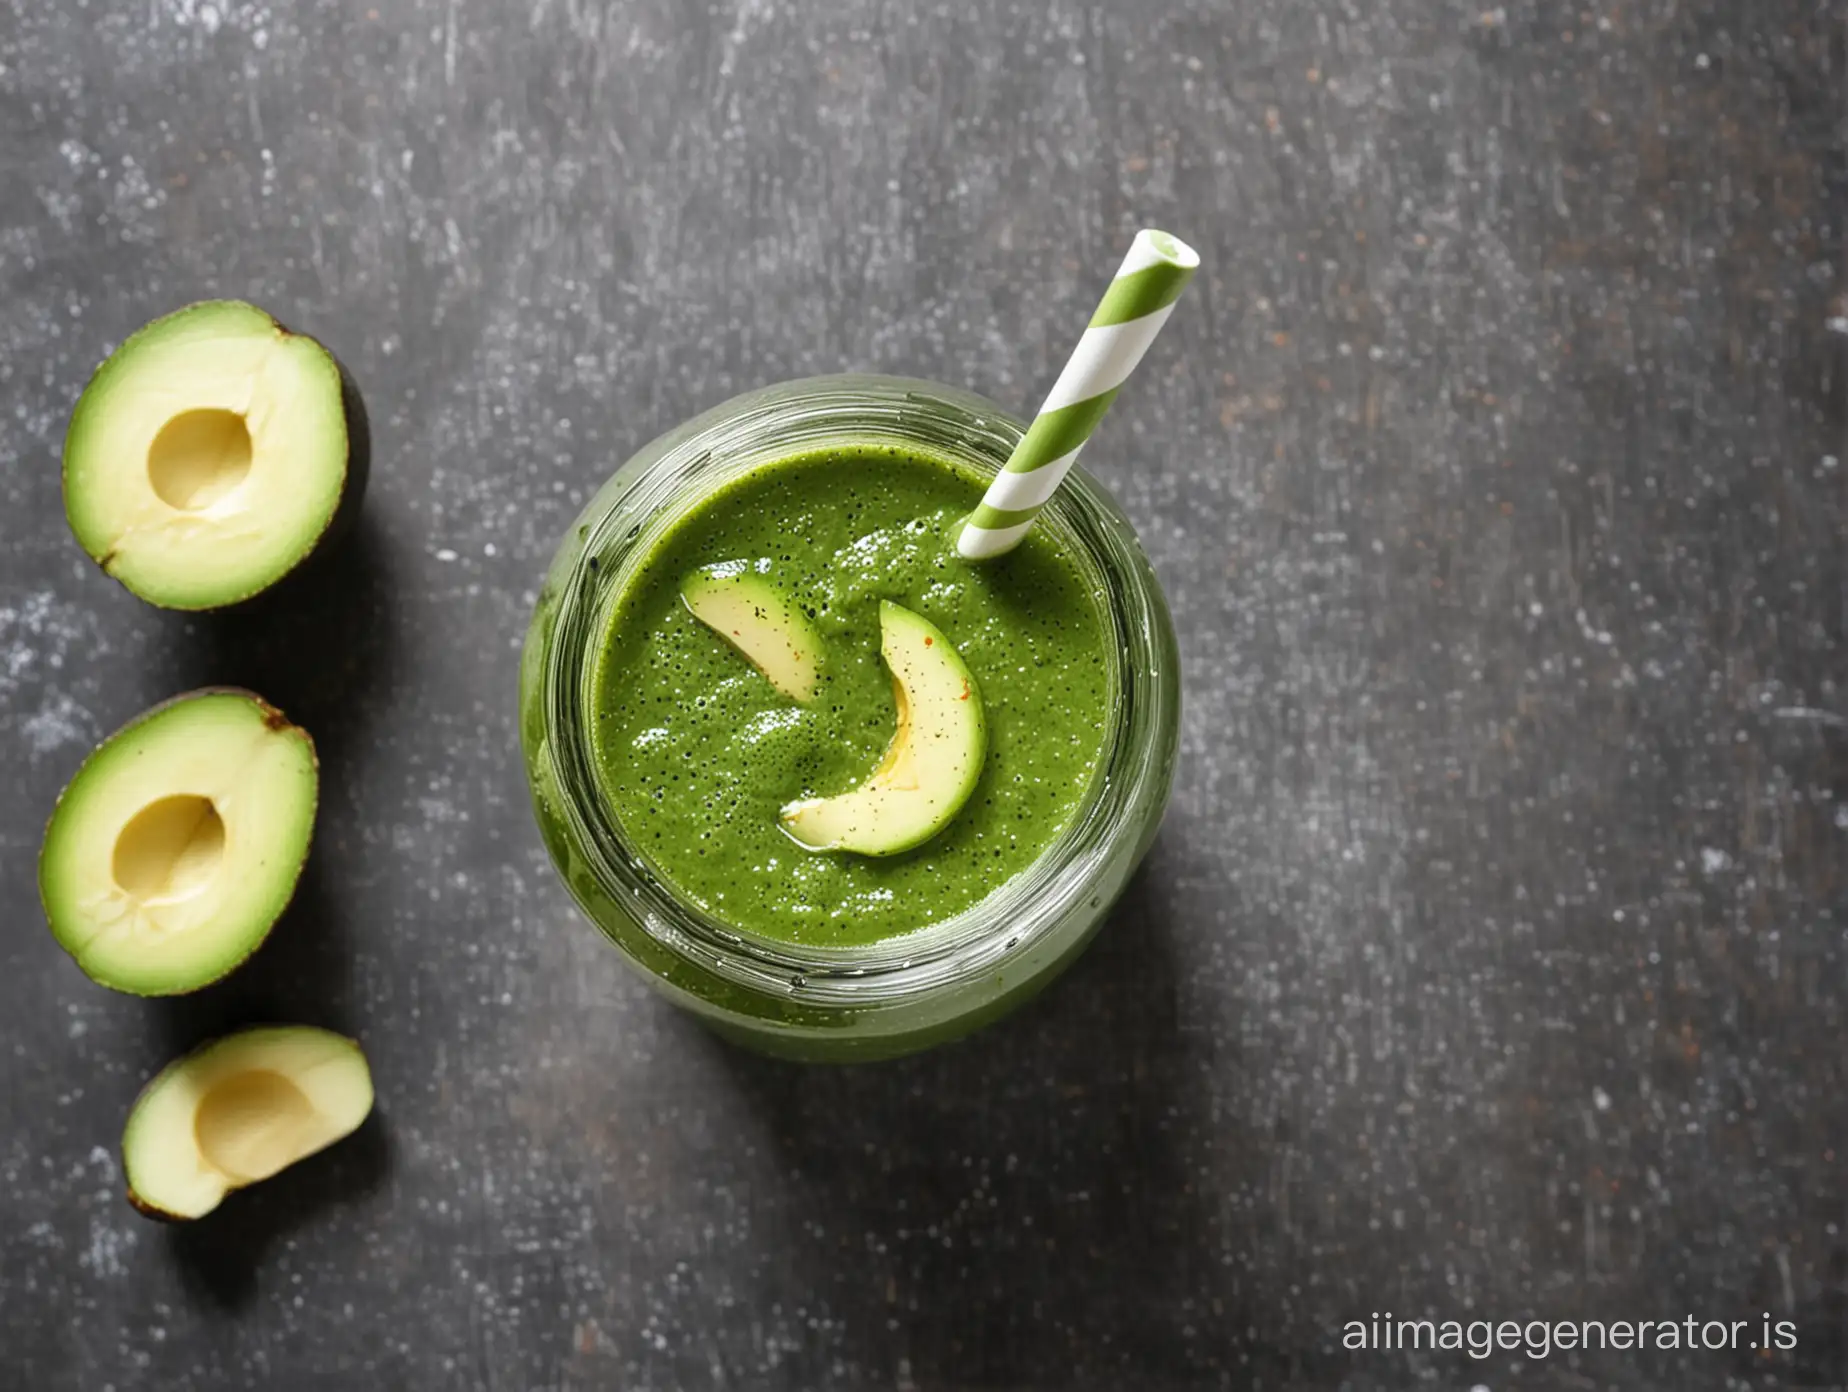 Healthy-Green-Smoothie-with-Apple-Avocado-and-Lemon-in-Jar